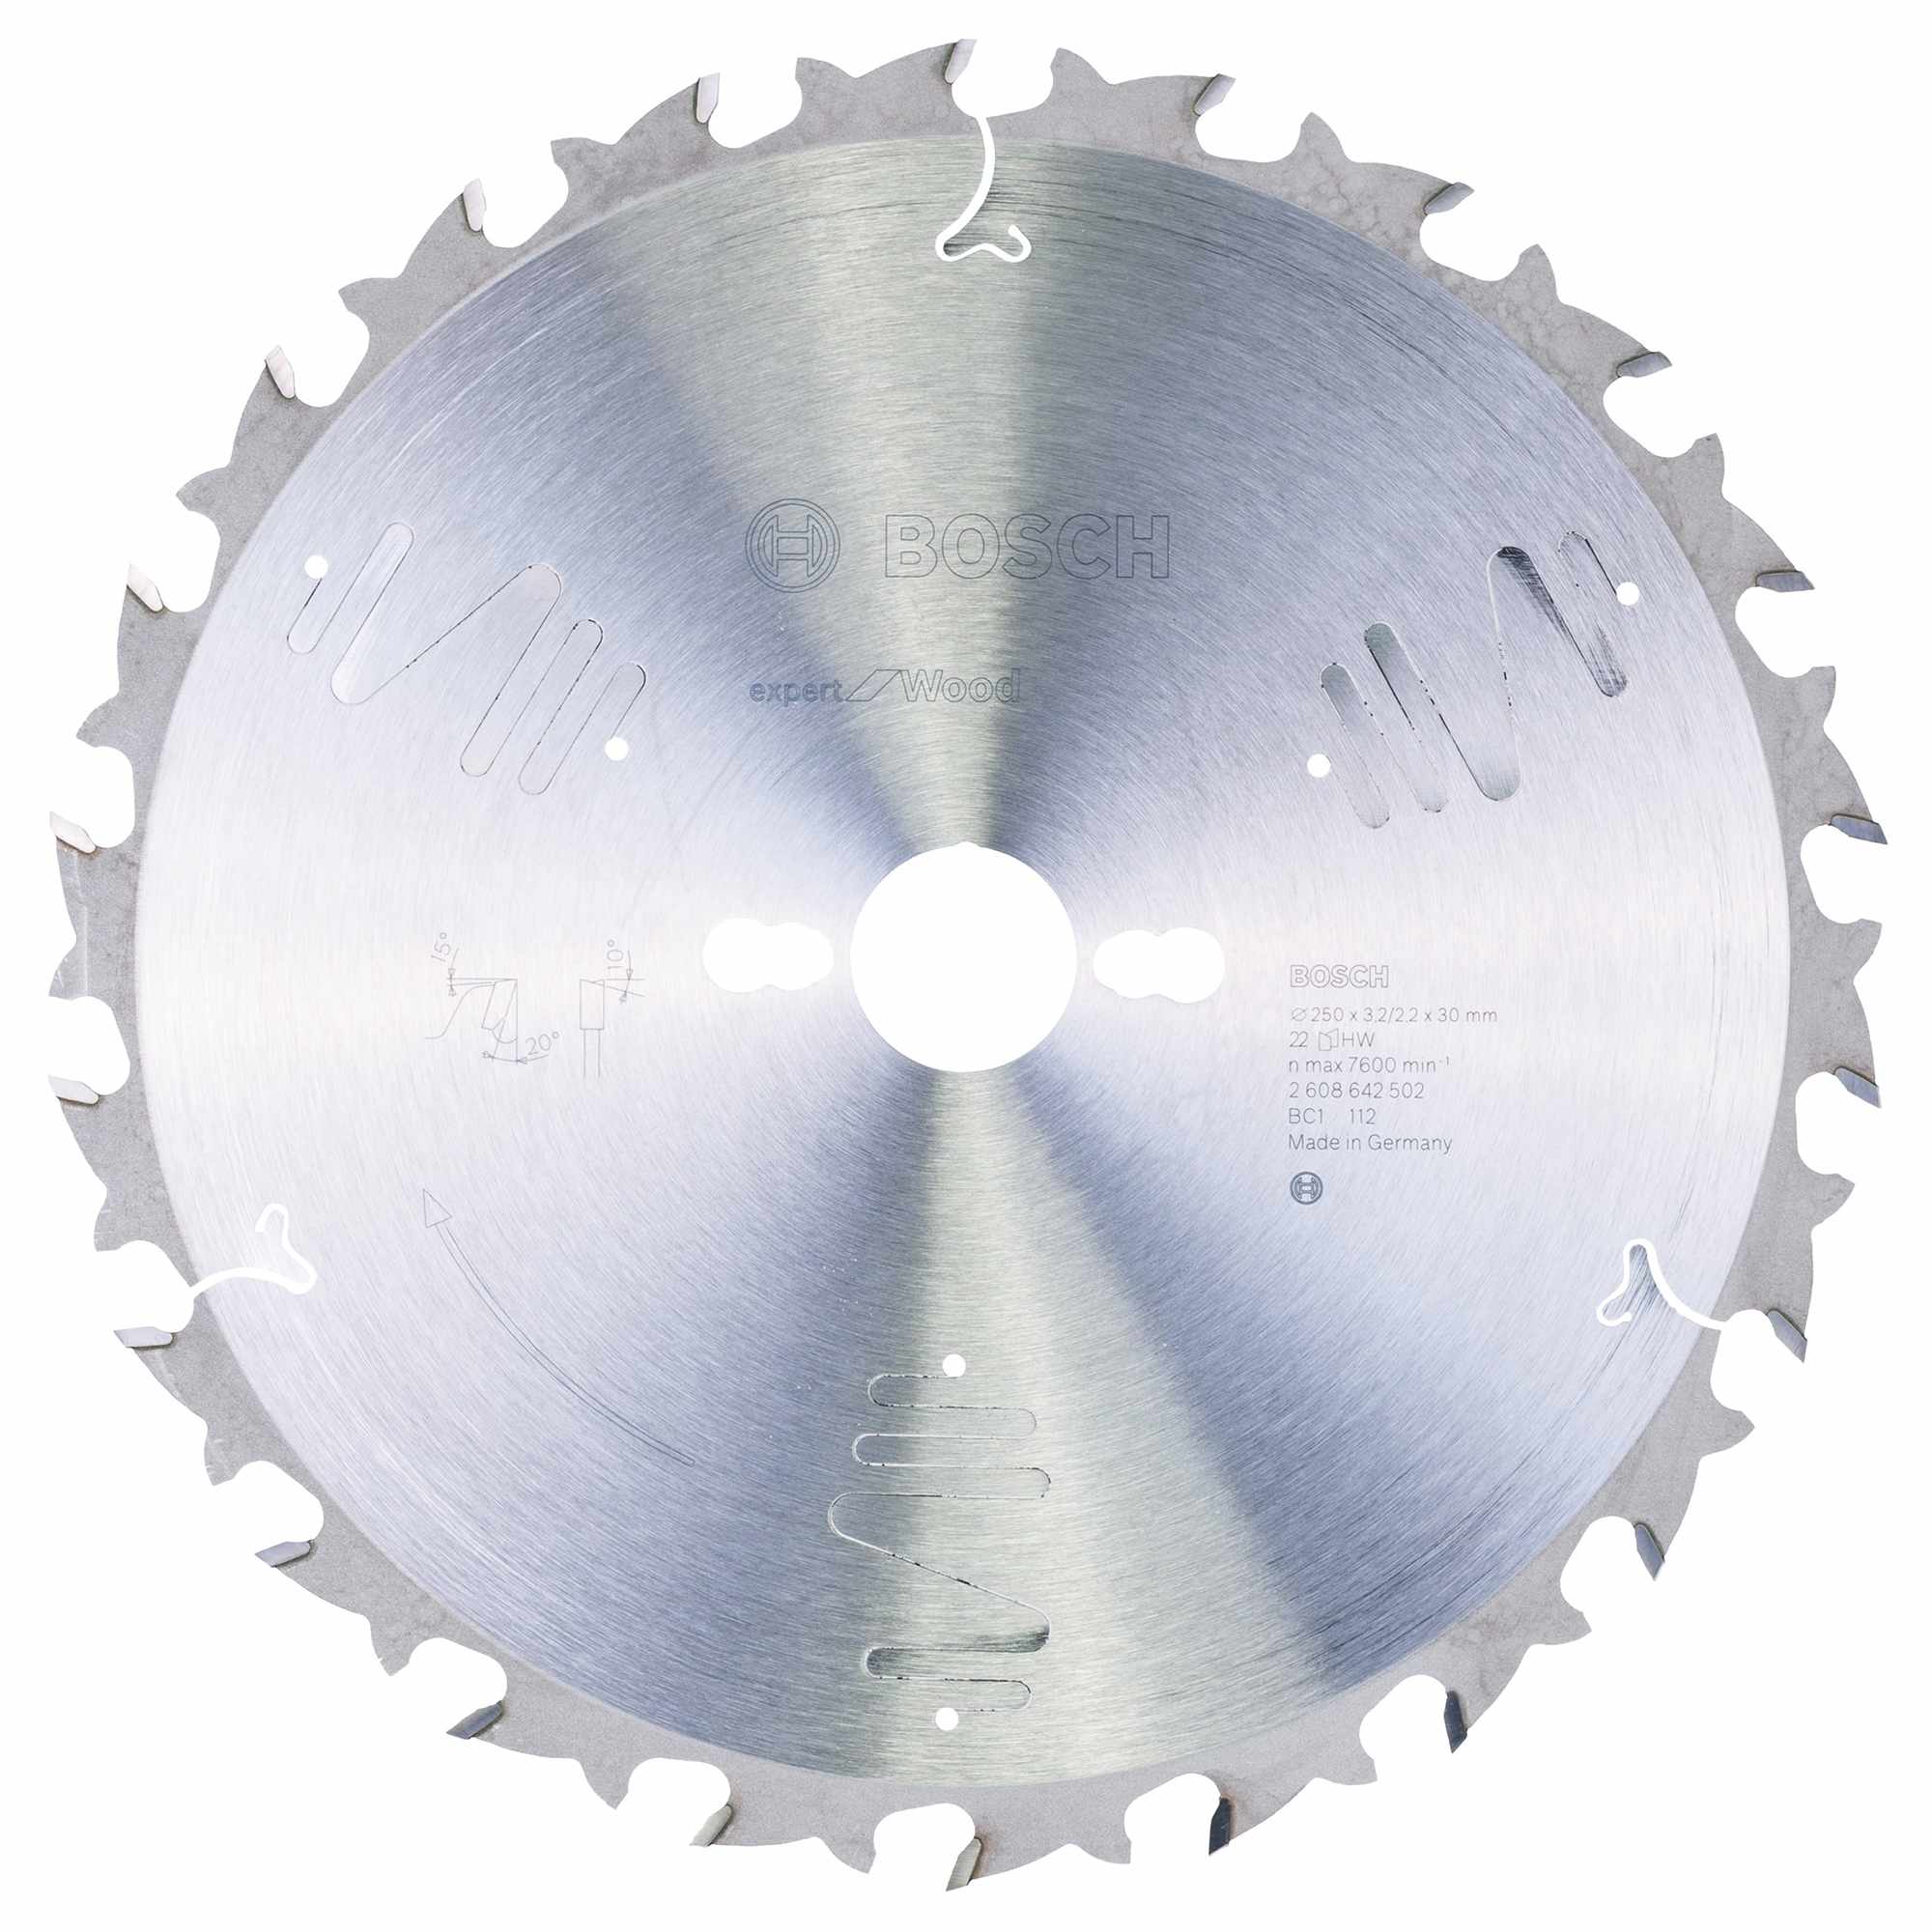 Bosch Expert Circular Saw Blade for Wood 250 x 30 x 3,2 mm, 22 2608642502 Power Tool Services